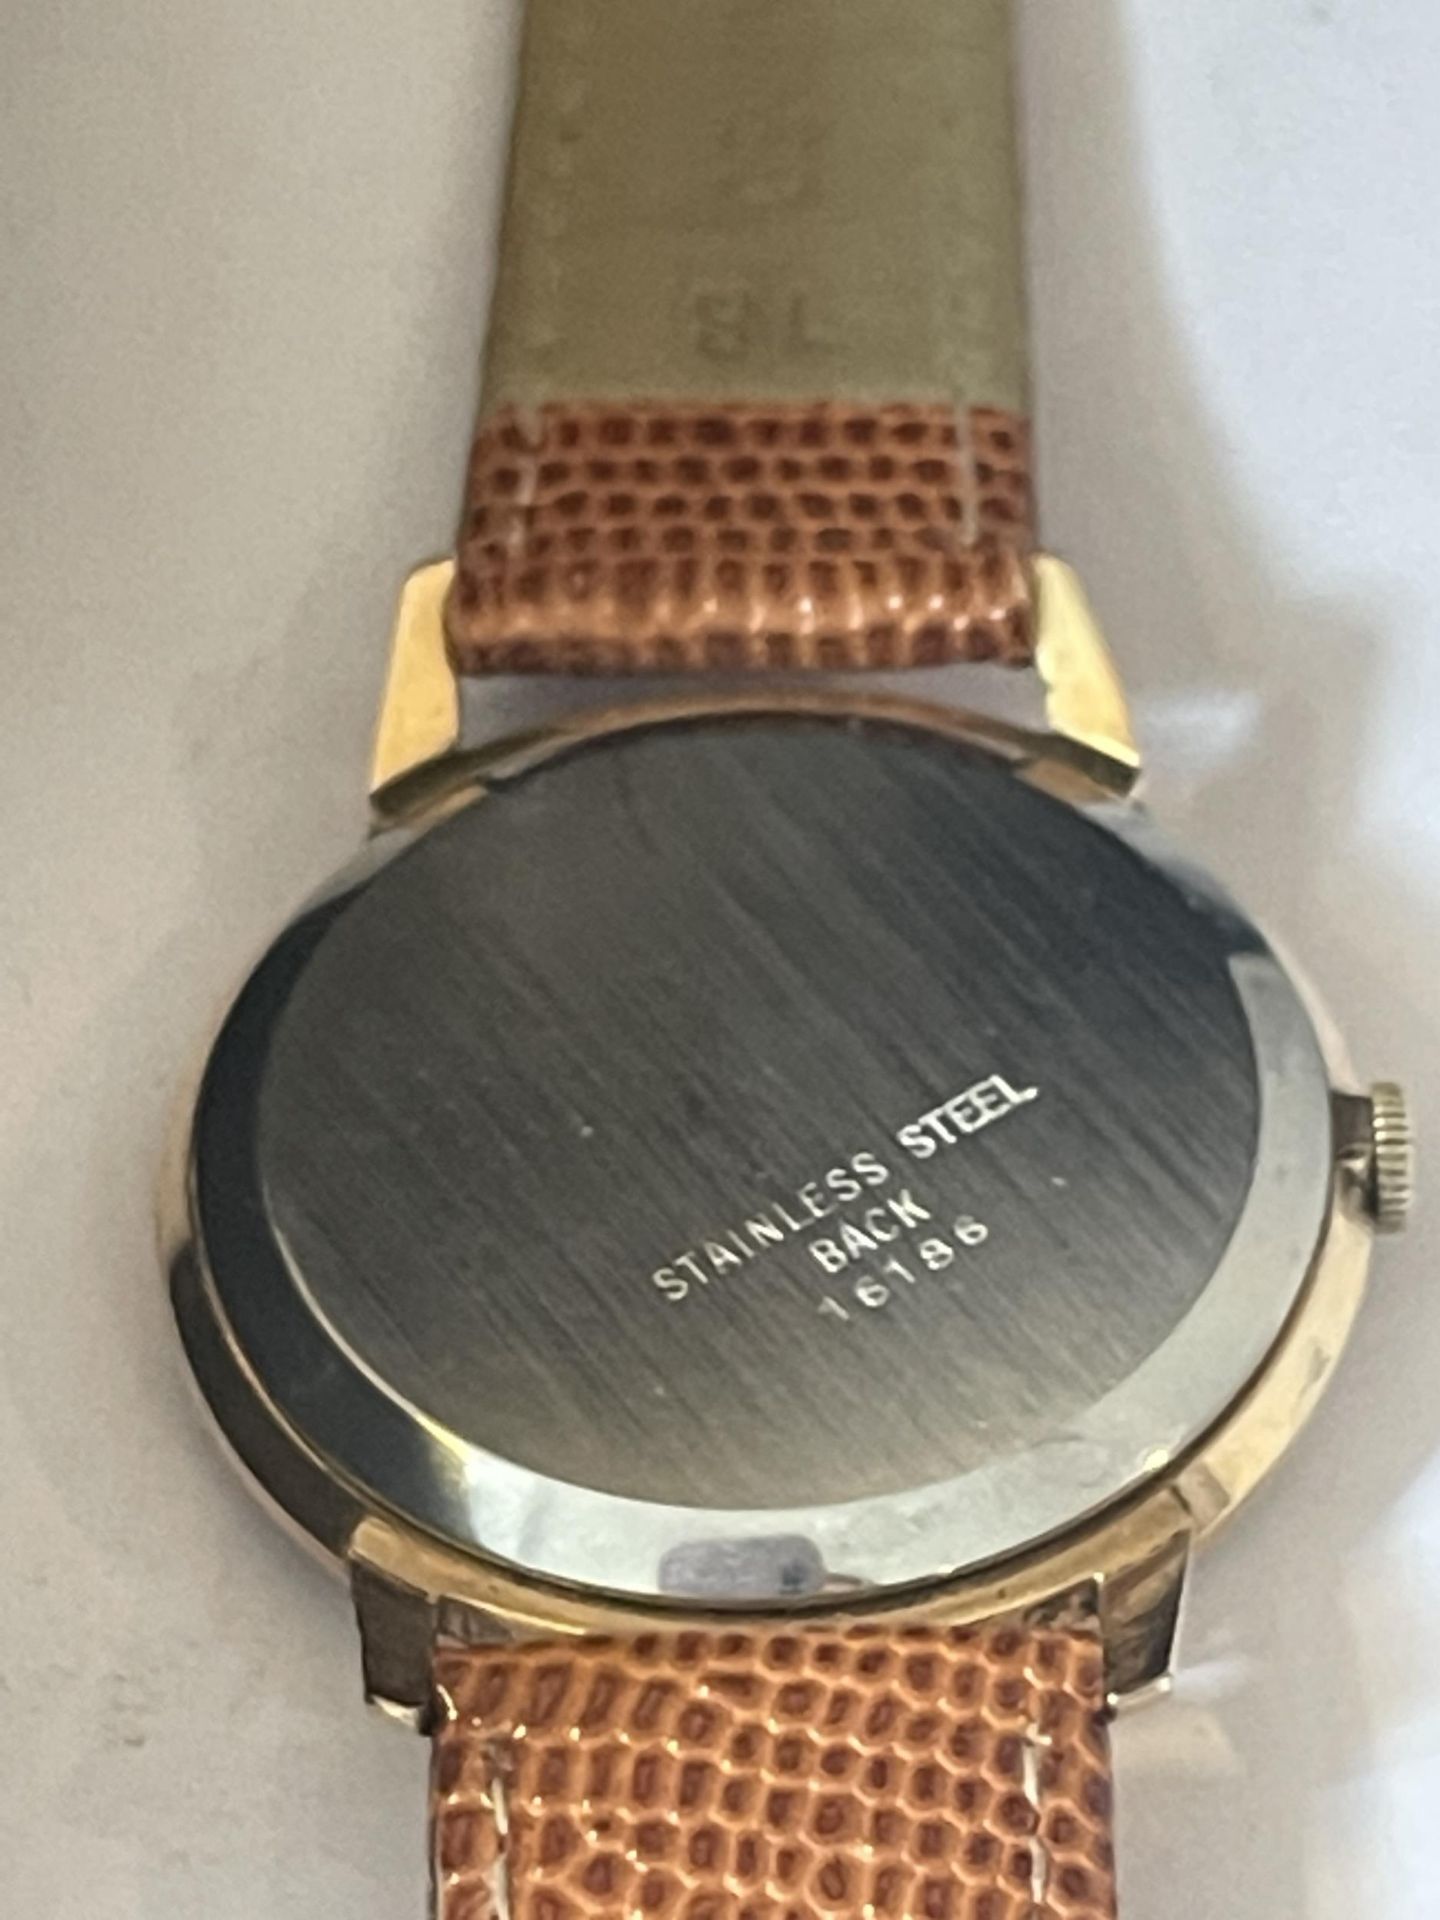 A GENTS VINTAGE GOLD PLATED 17 RUBIS WRIST WATCH WITH A PRESENTATION BOX SEEN WORKING BUT NO - Image 3 of 3